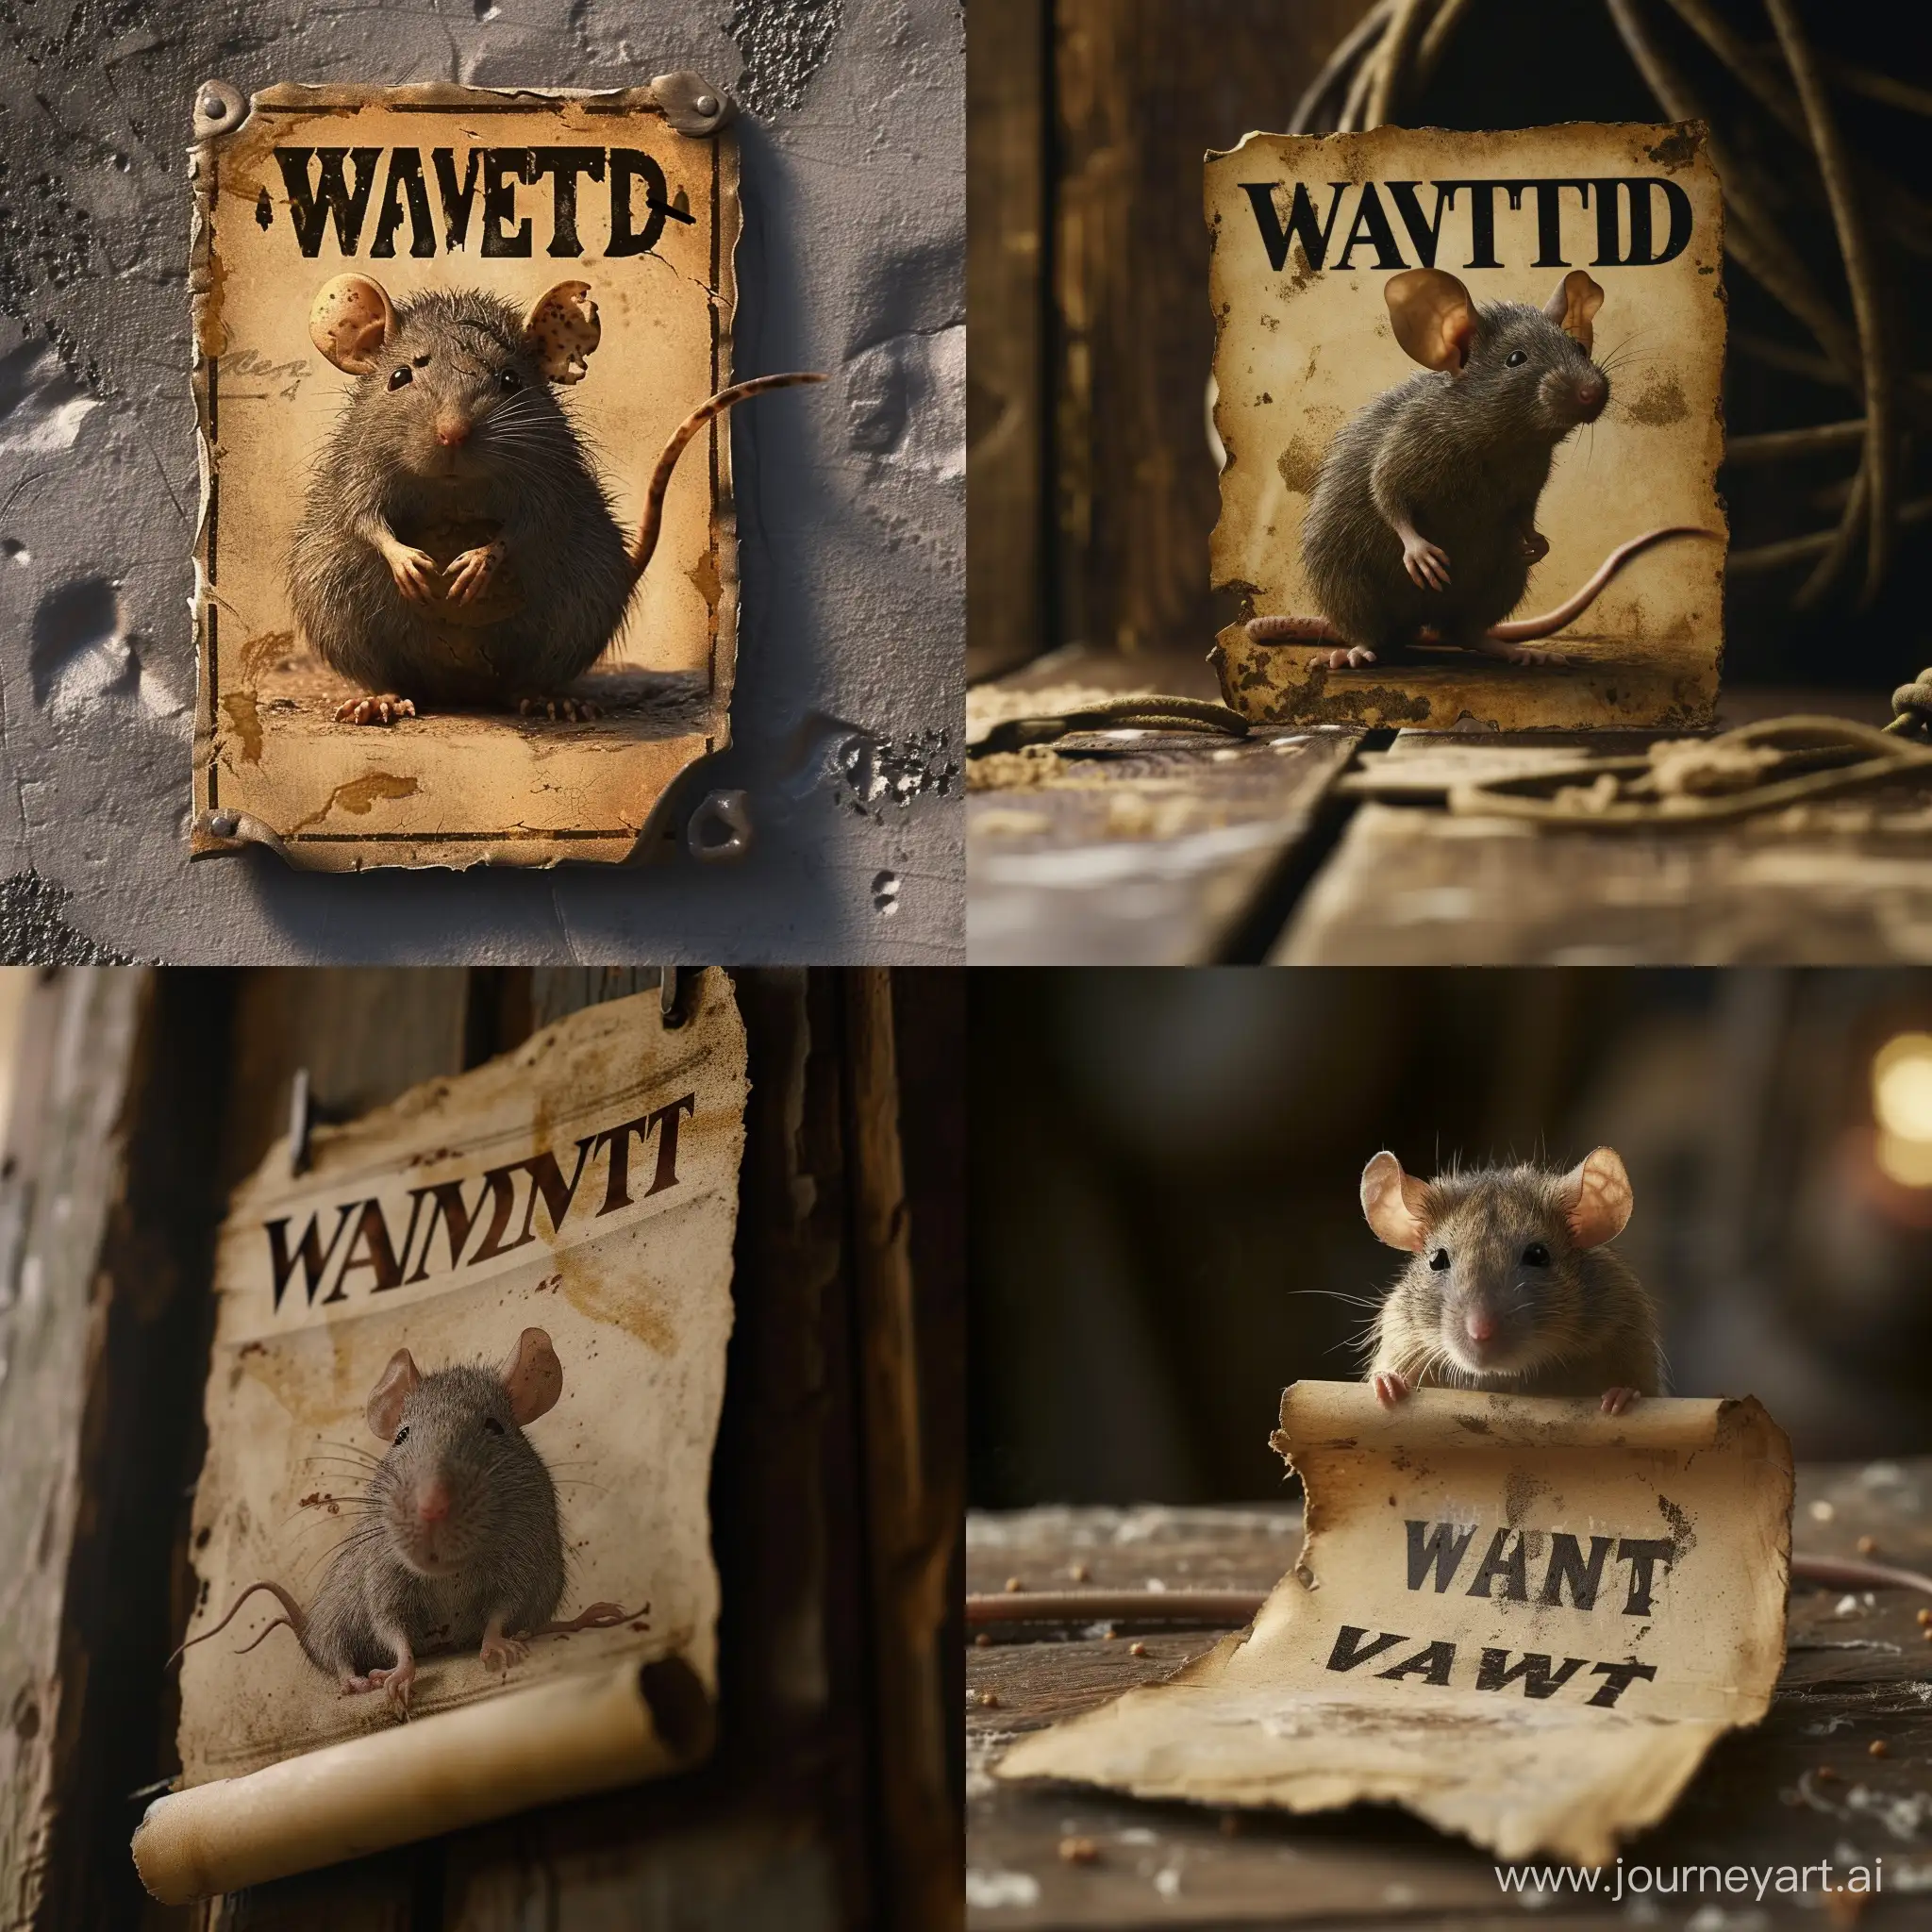 the battered rat on the Wanted poster